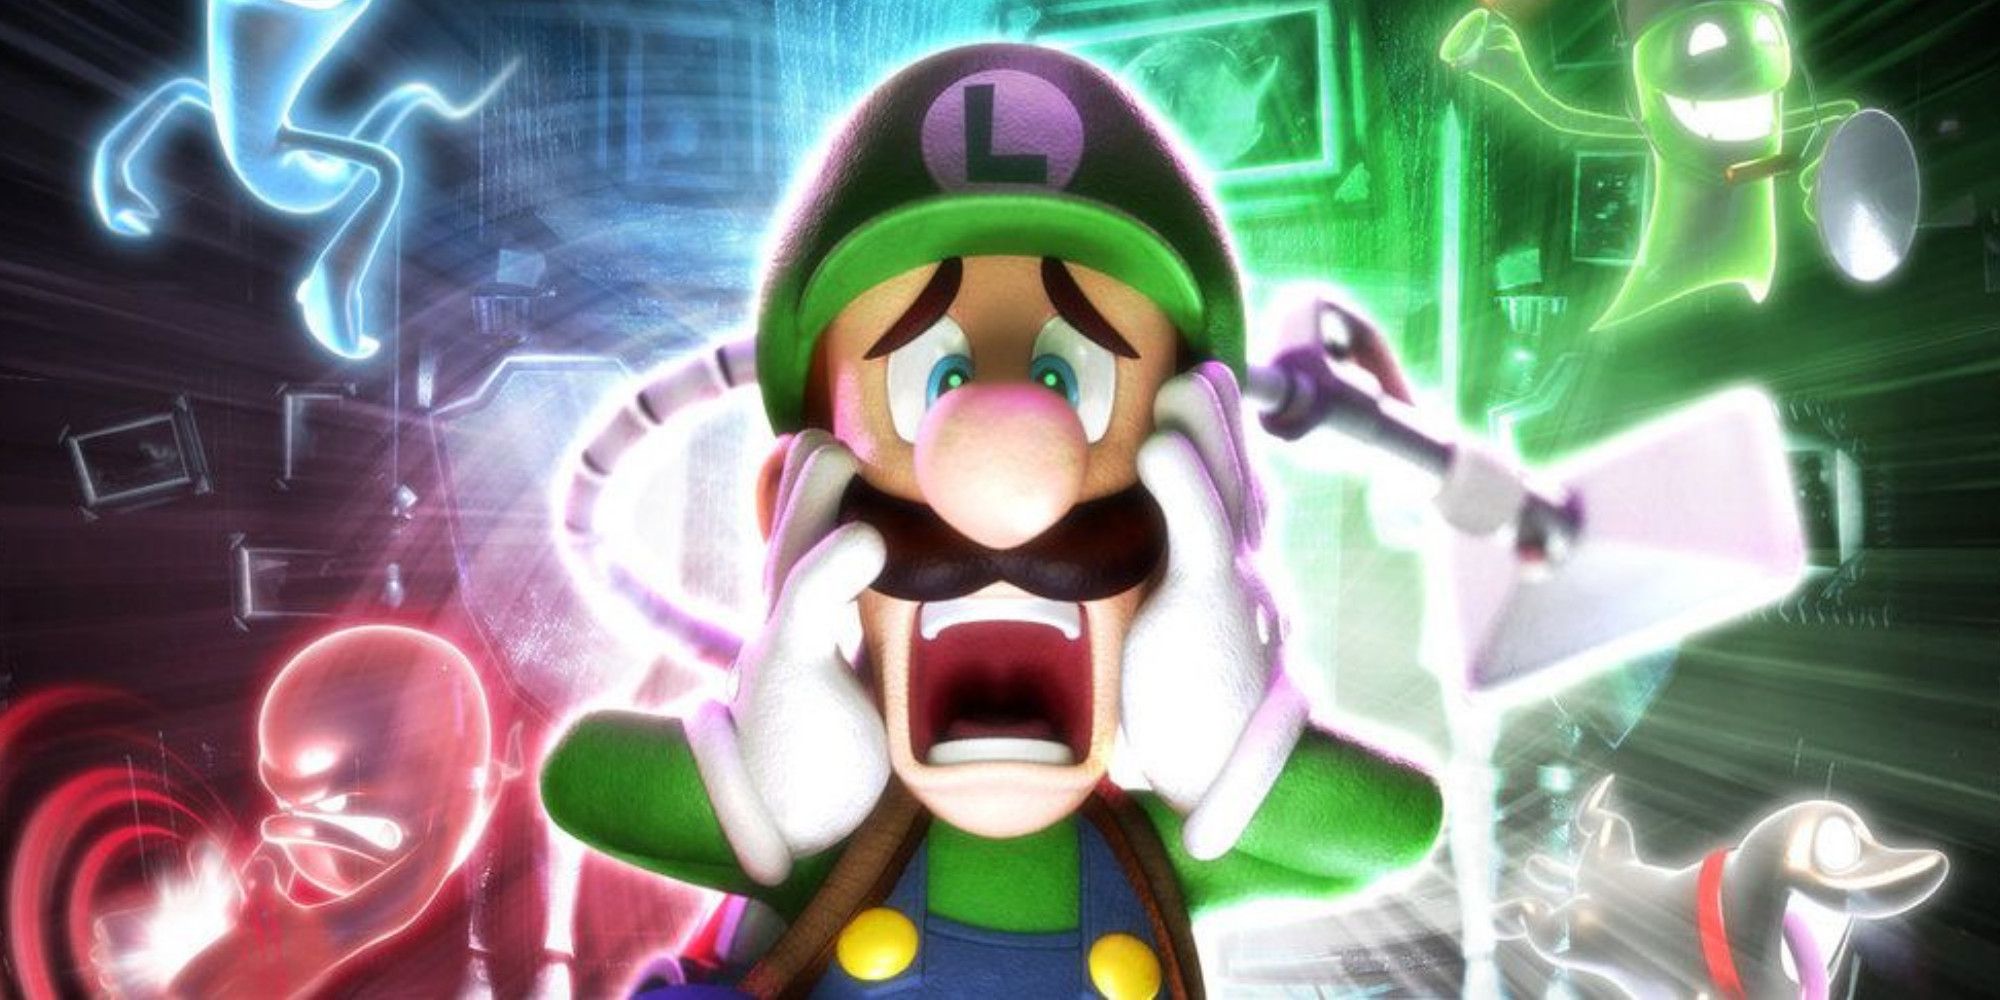 Luigi screaming in front of four different color ghosts in the background